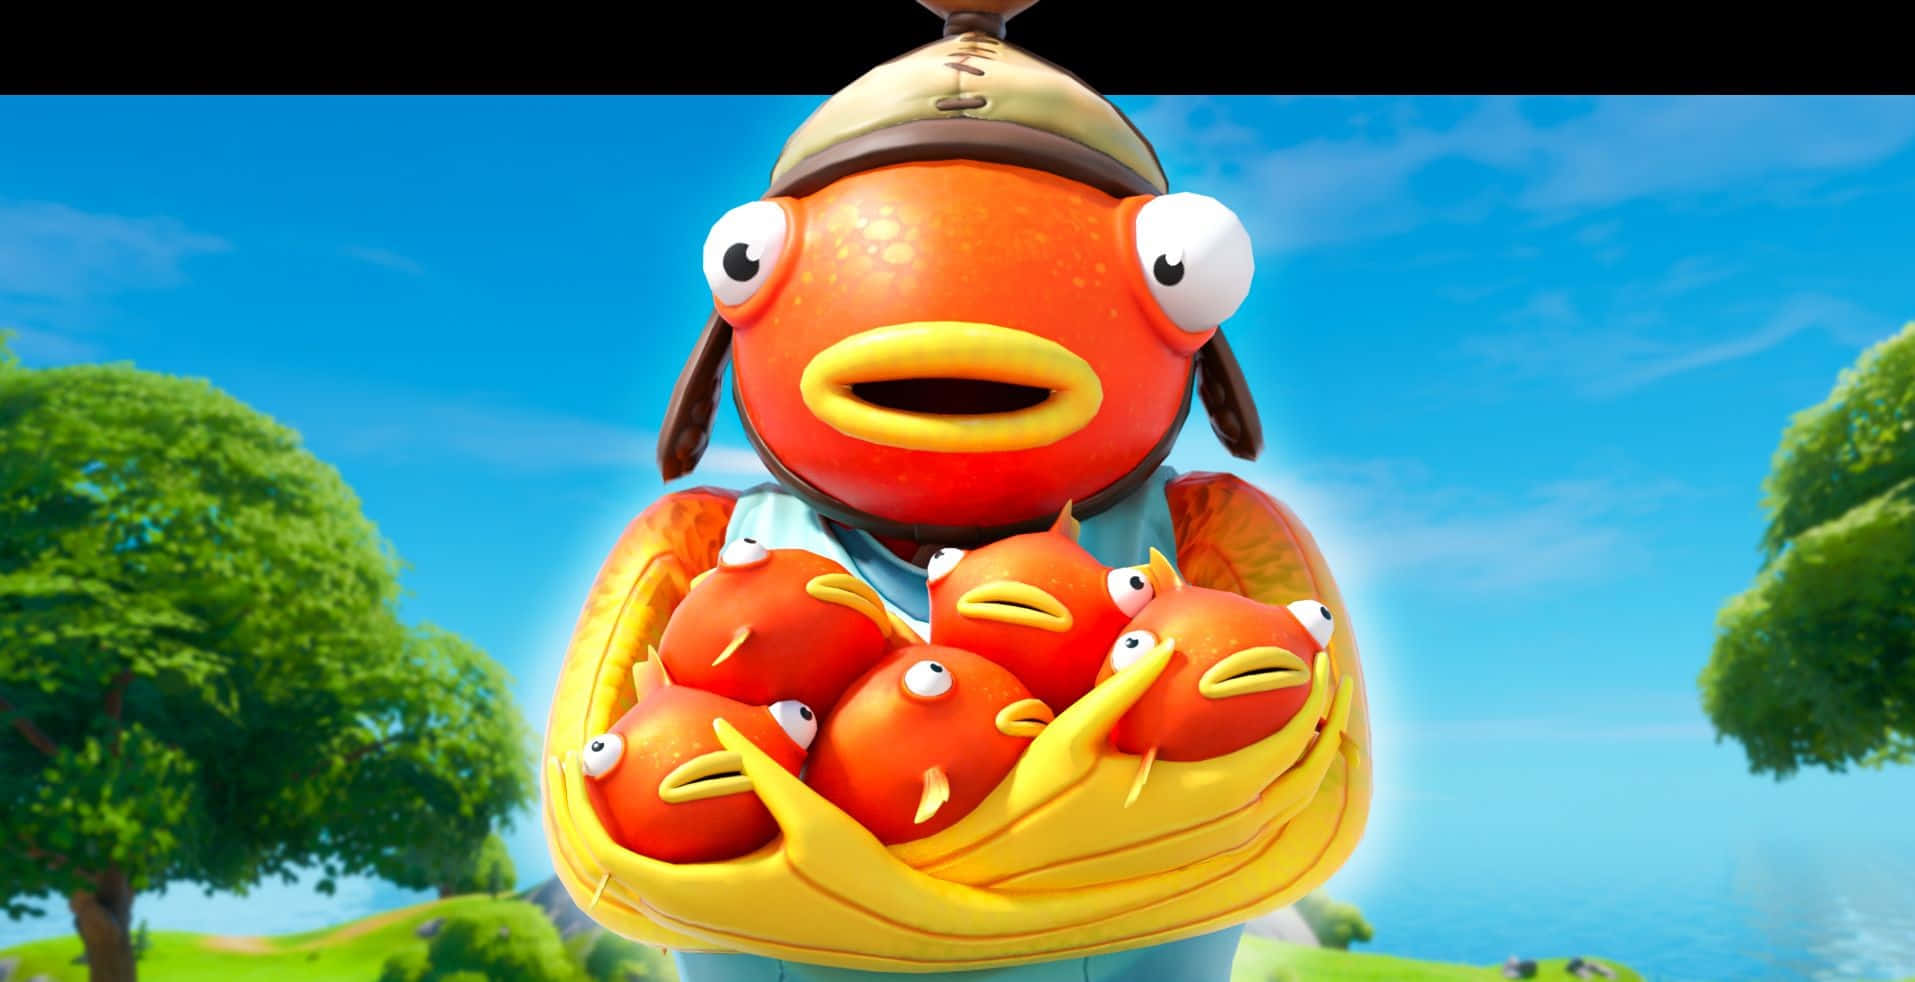 49 Fishstick ideas  best gaming wallpapers gaming wallpapers fortnite